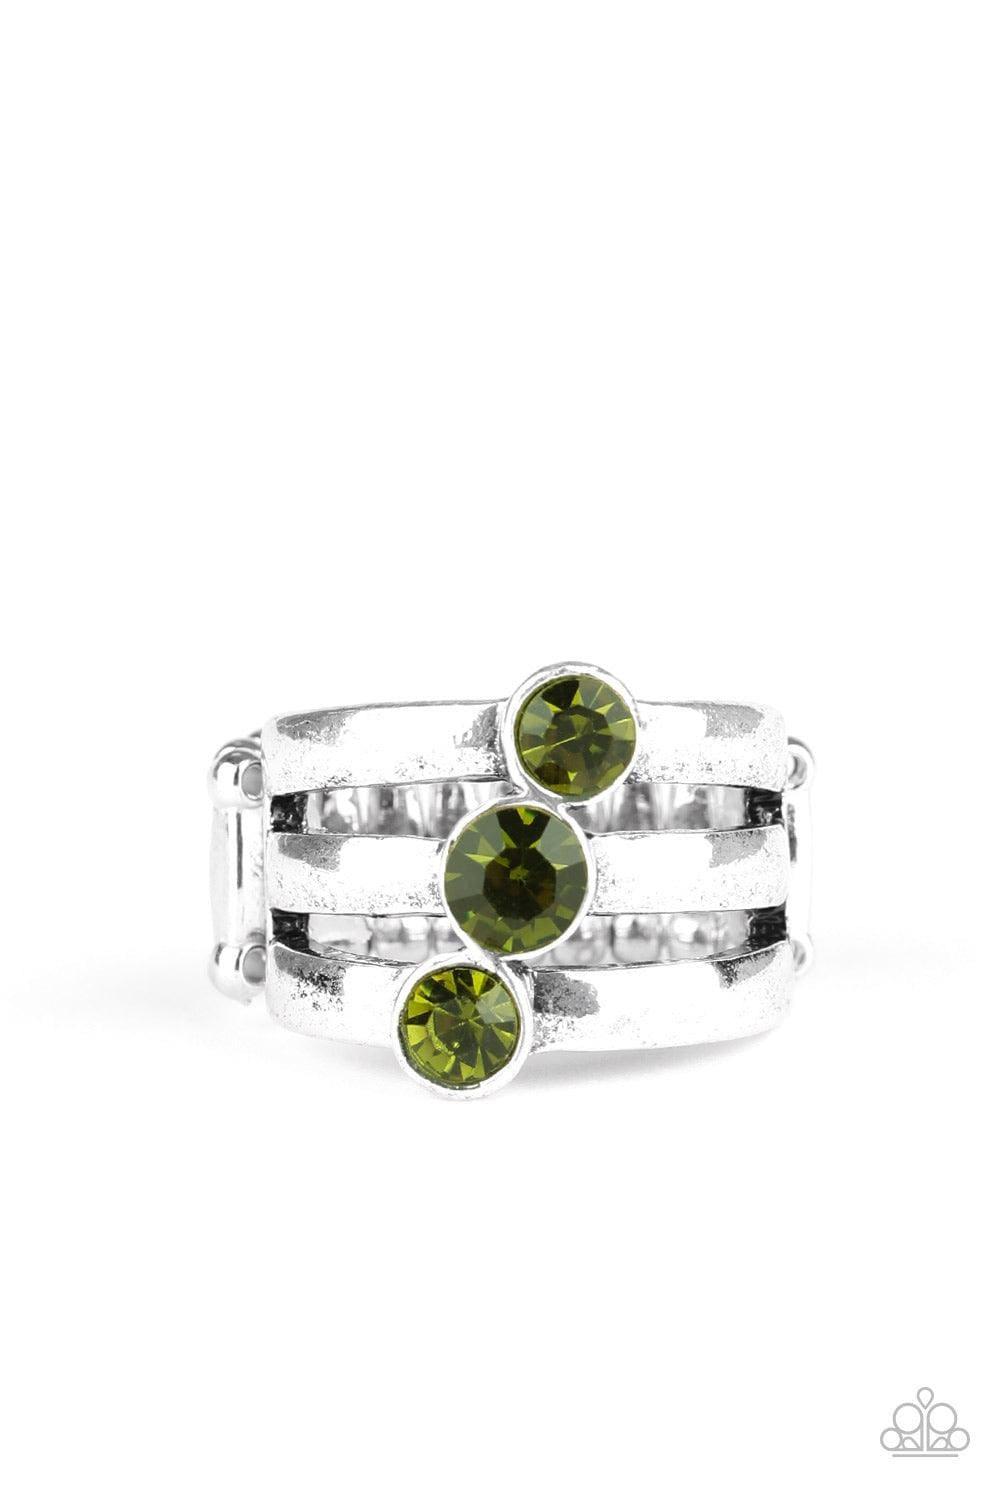 Paparazzi Accessories - Triple The Twinkle - Green Ring - Bling by JessieK